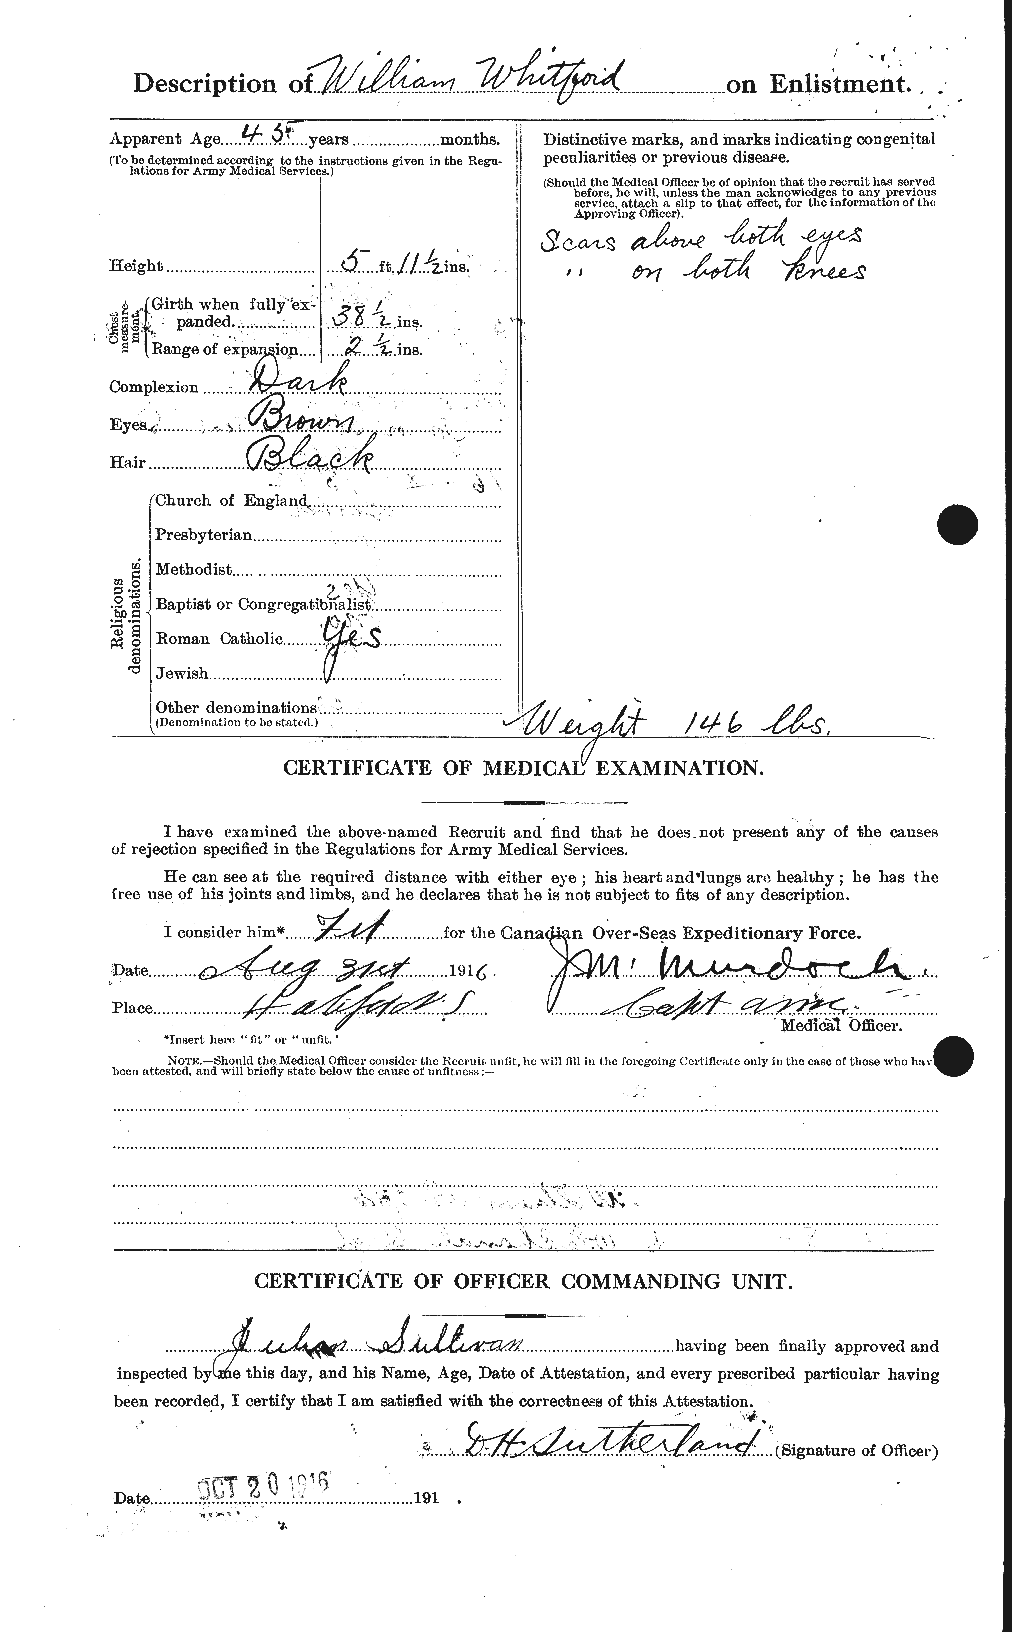 Personnel Records of the First World War - CEF 670780b